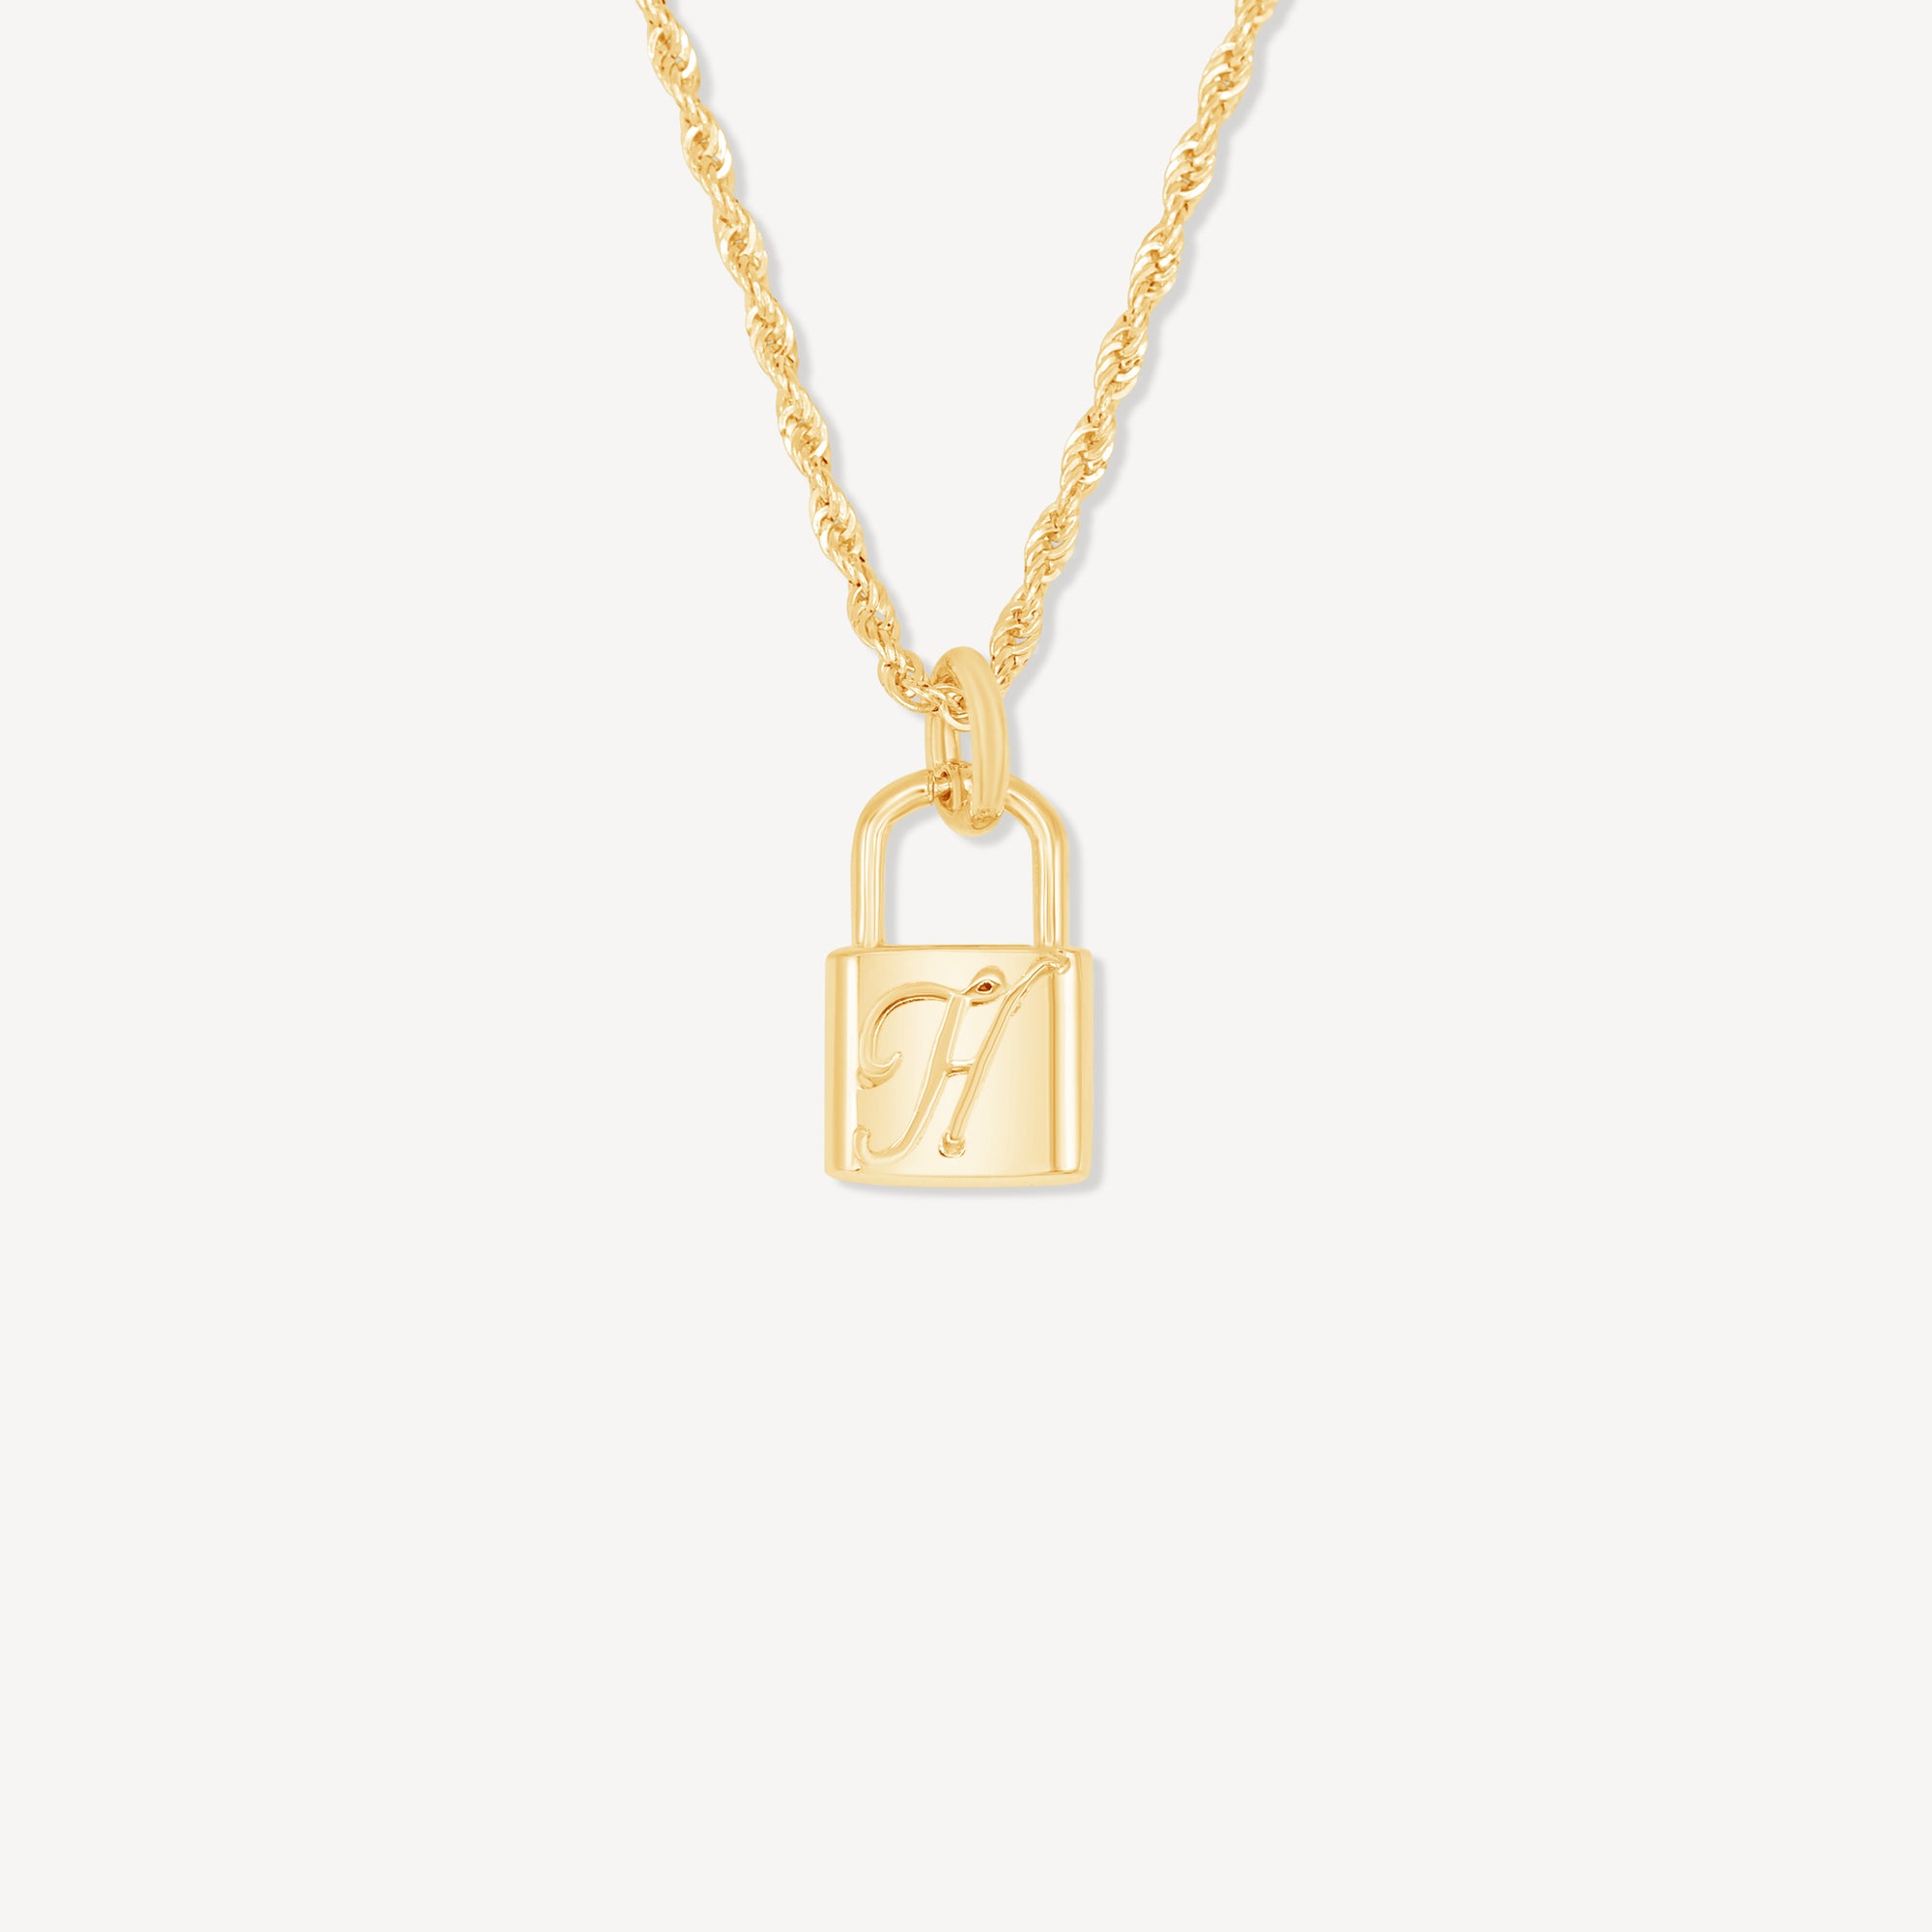 Silver Lock Necklace - Gold Presidents